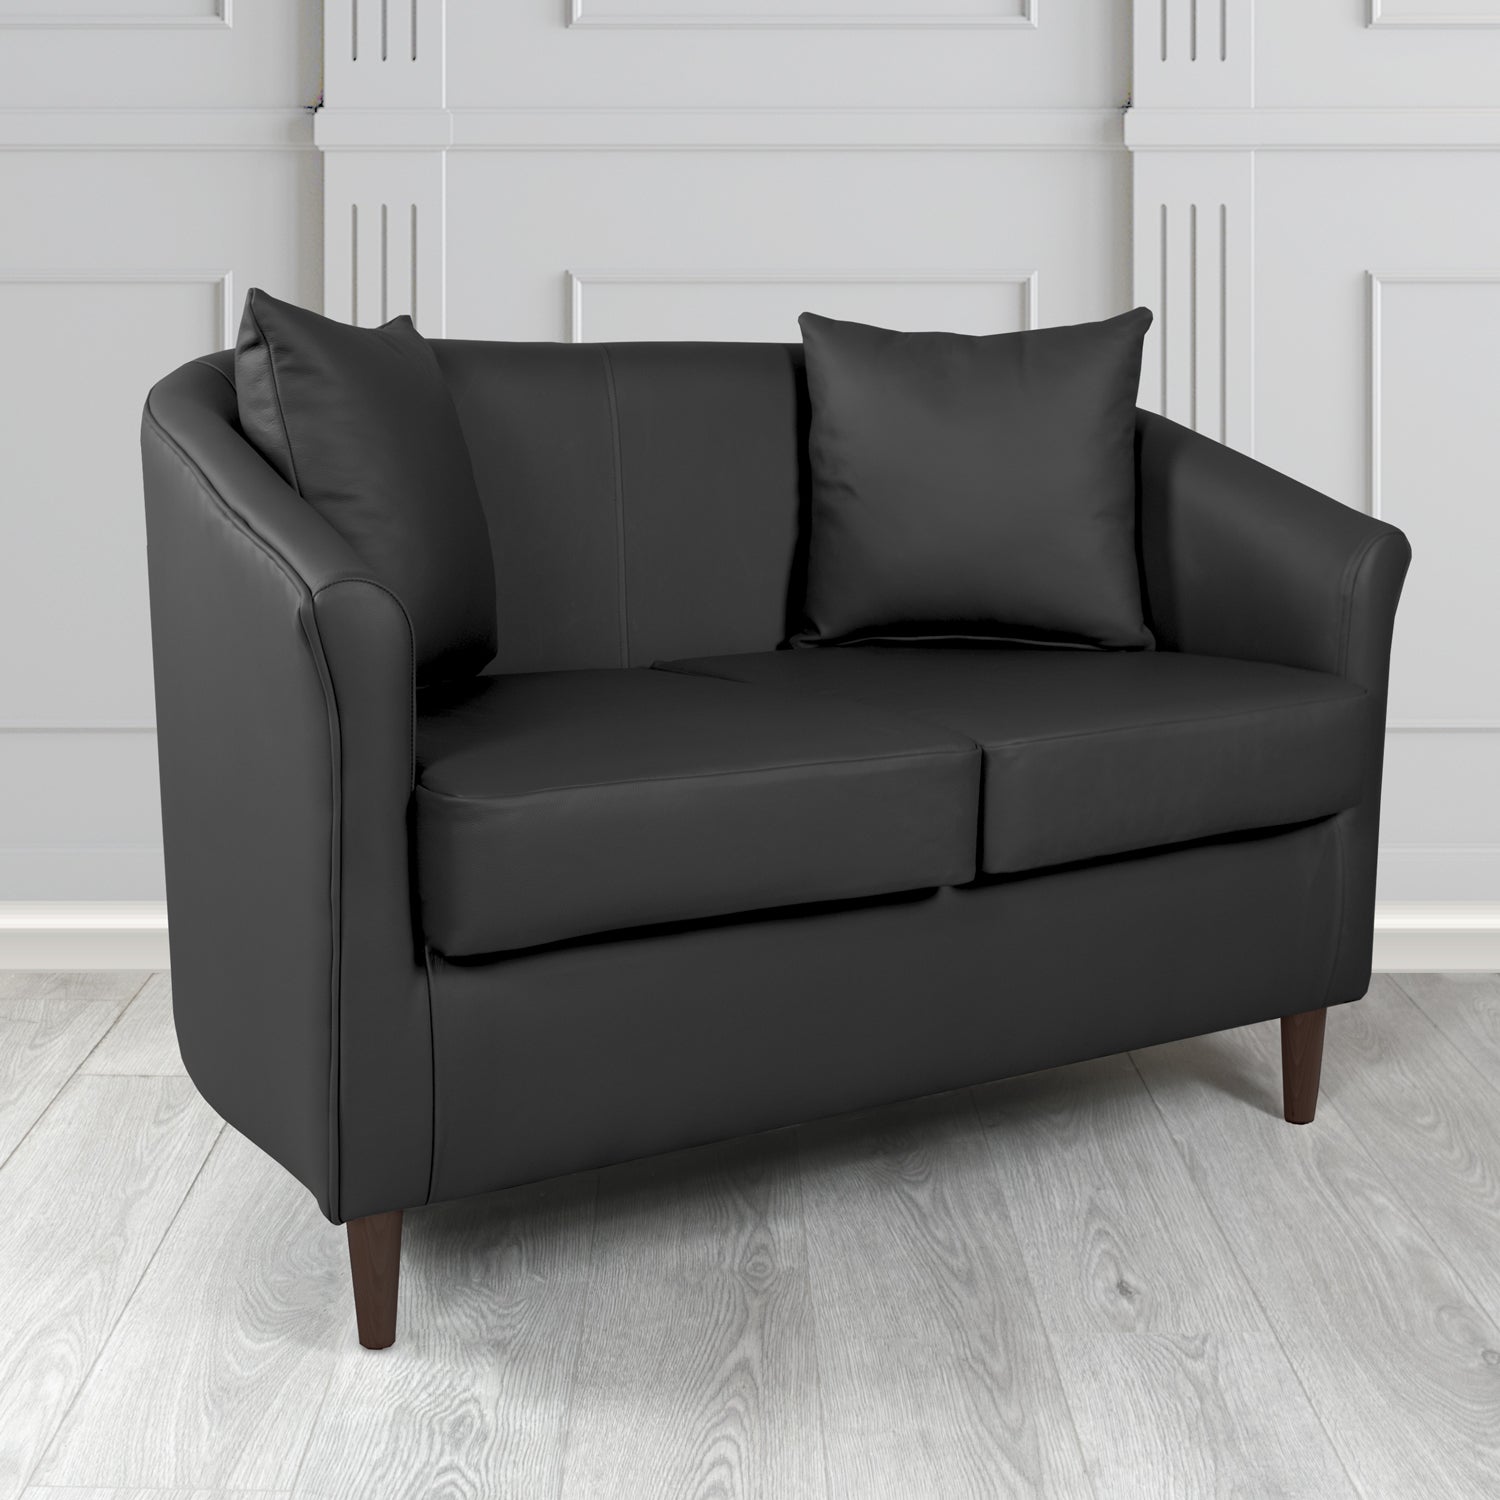 St Tropez 2 Seater Tub Sofa in Madrid Black Faux Leather